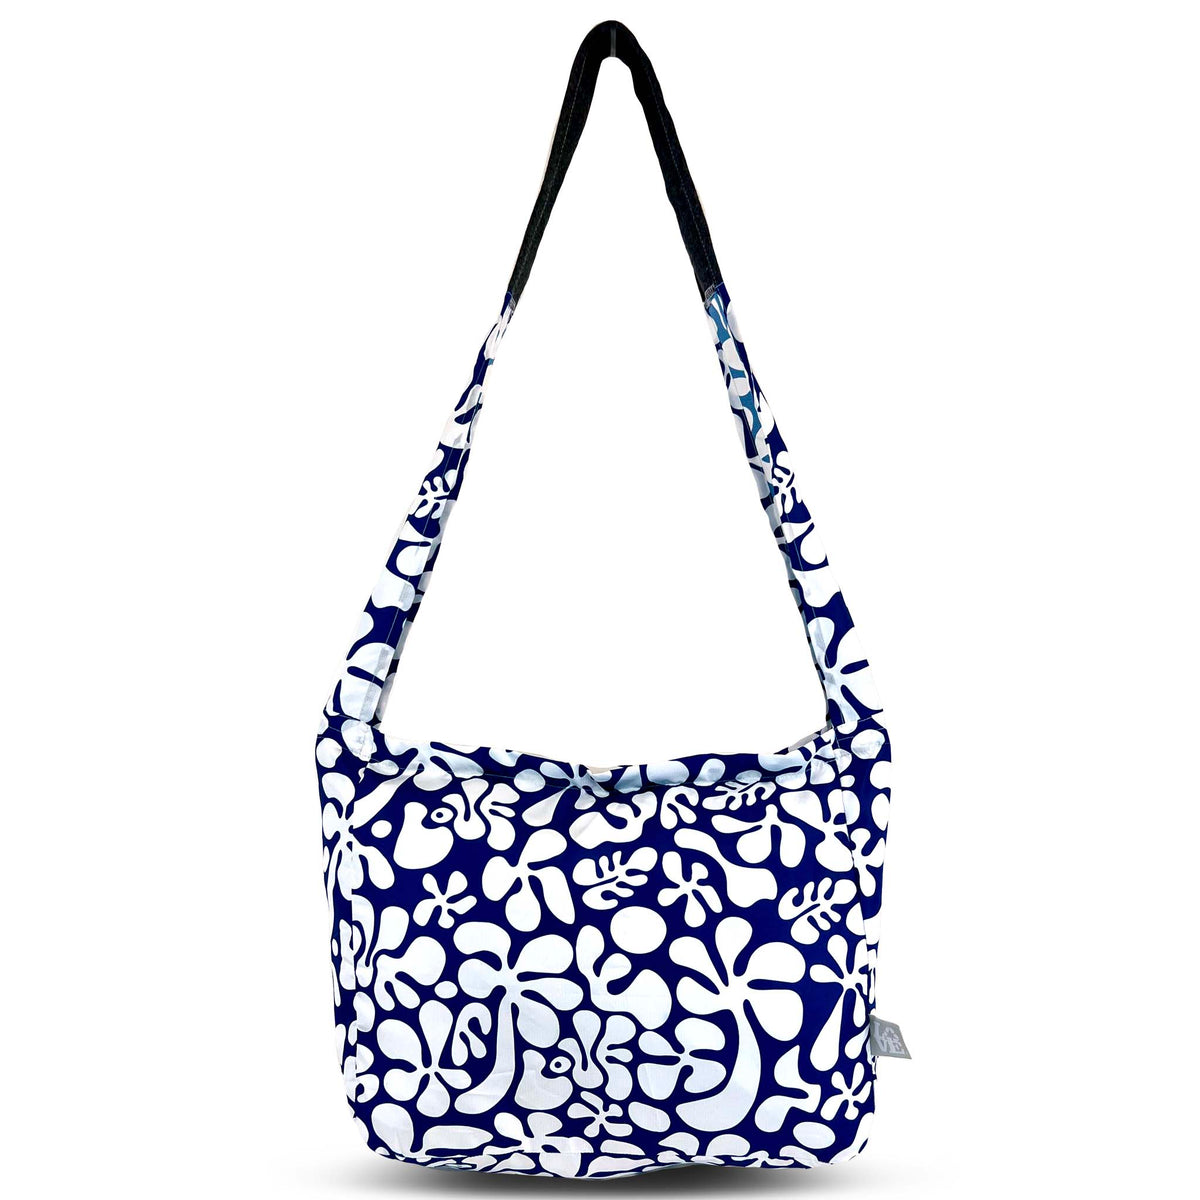 Crossbody Stash It Tote Bag -  Groovy LOVE Navy (with extra long strap)